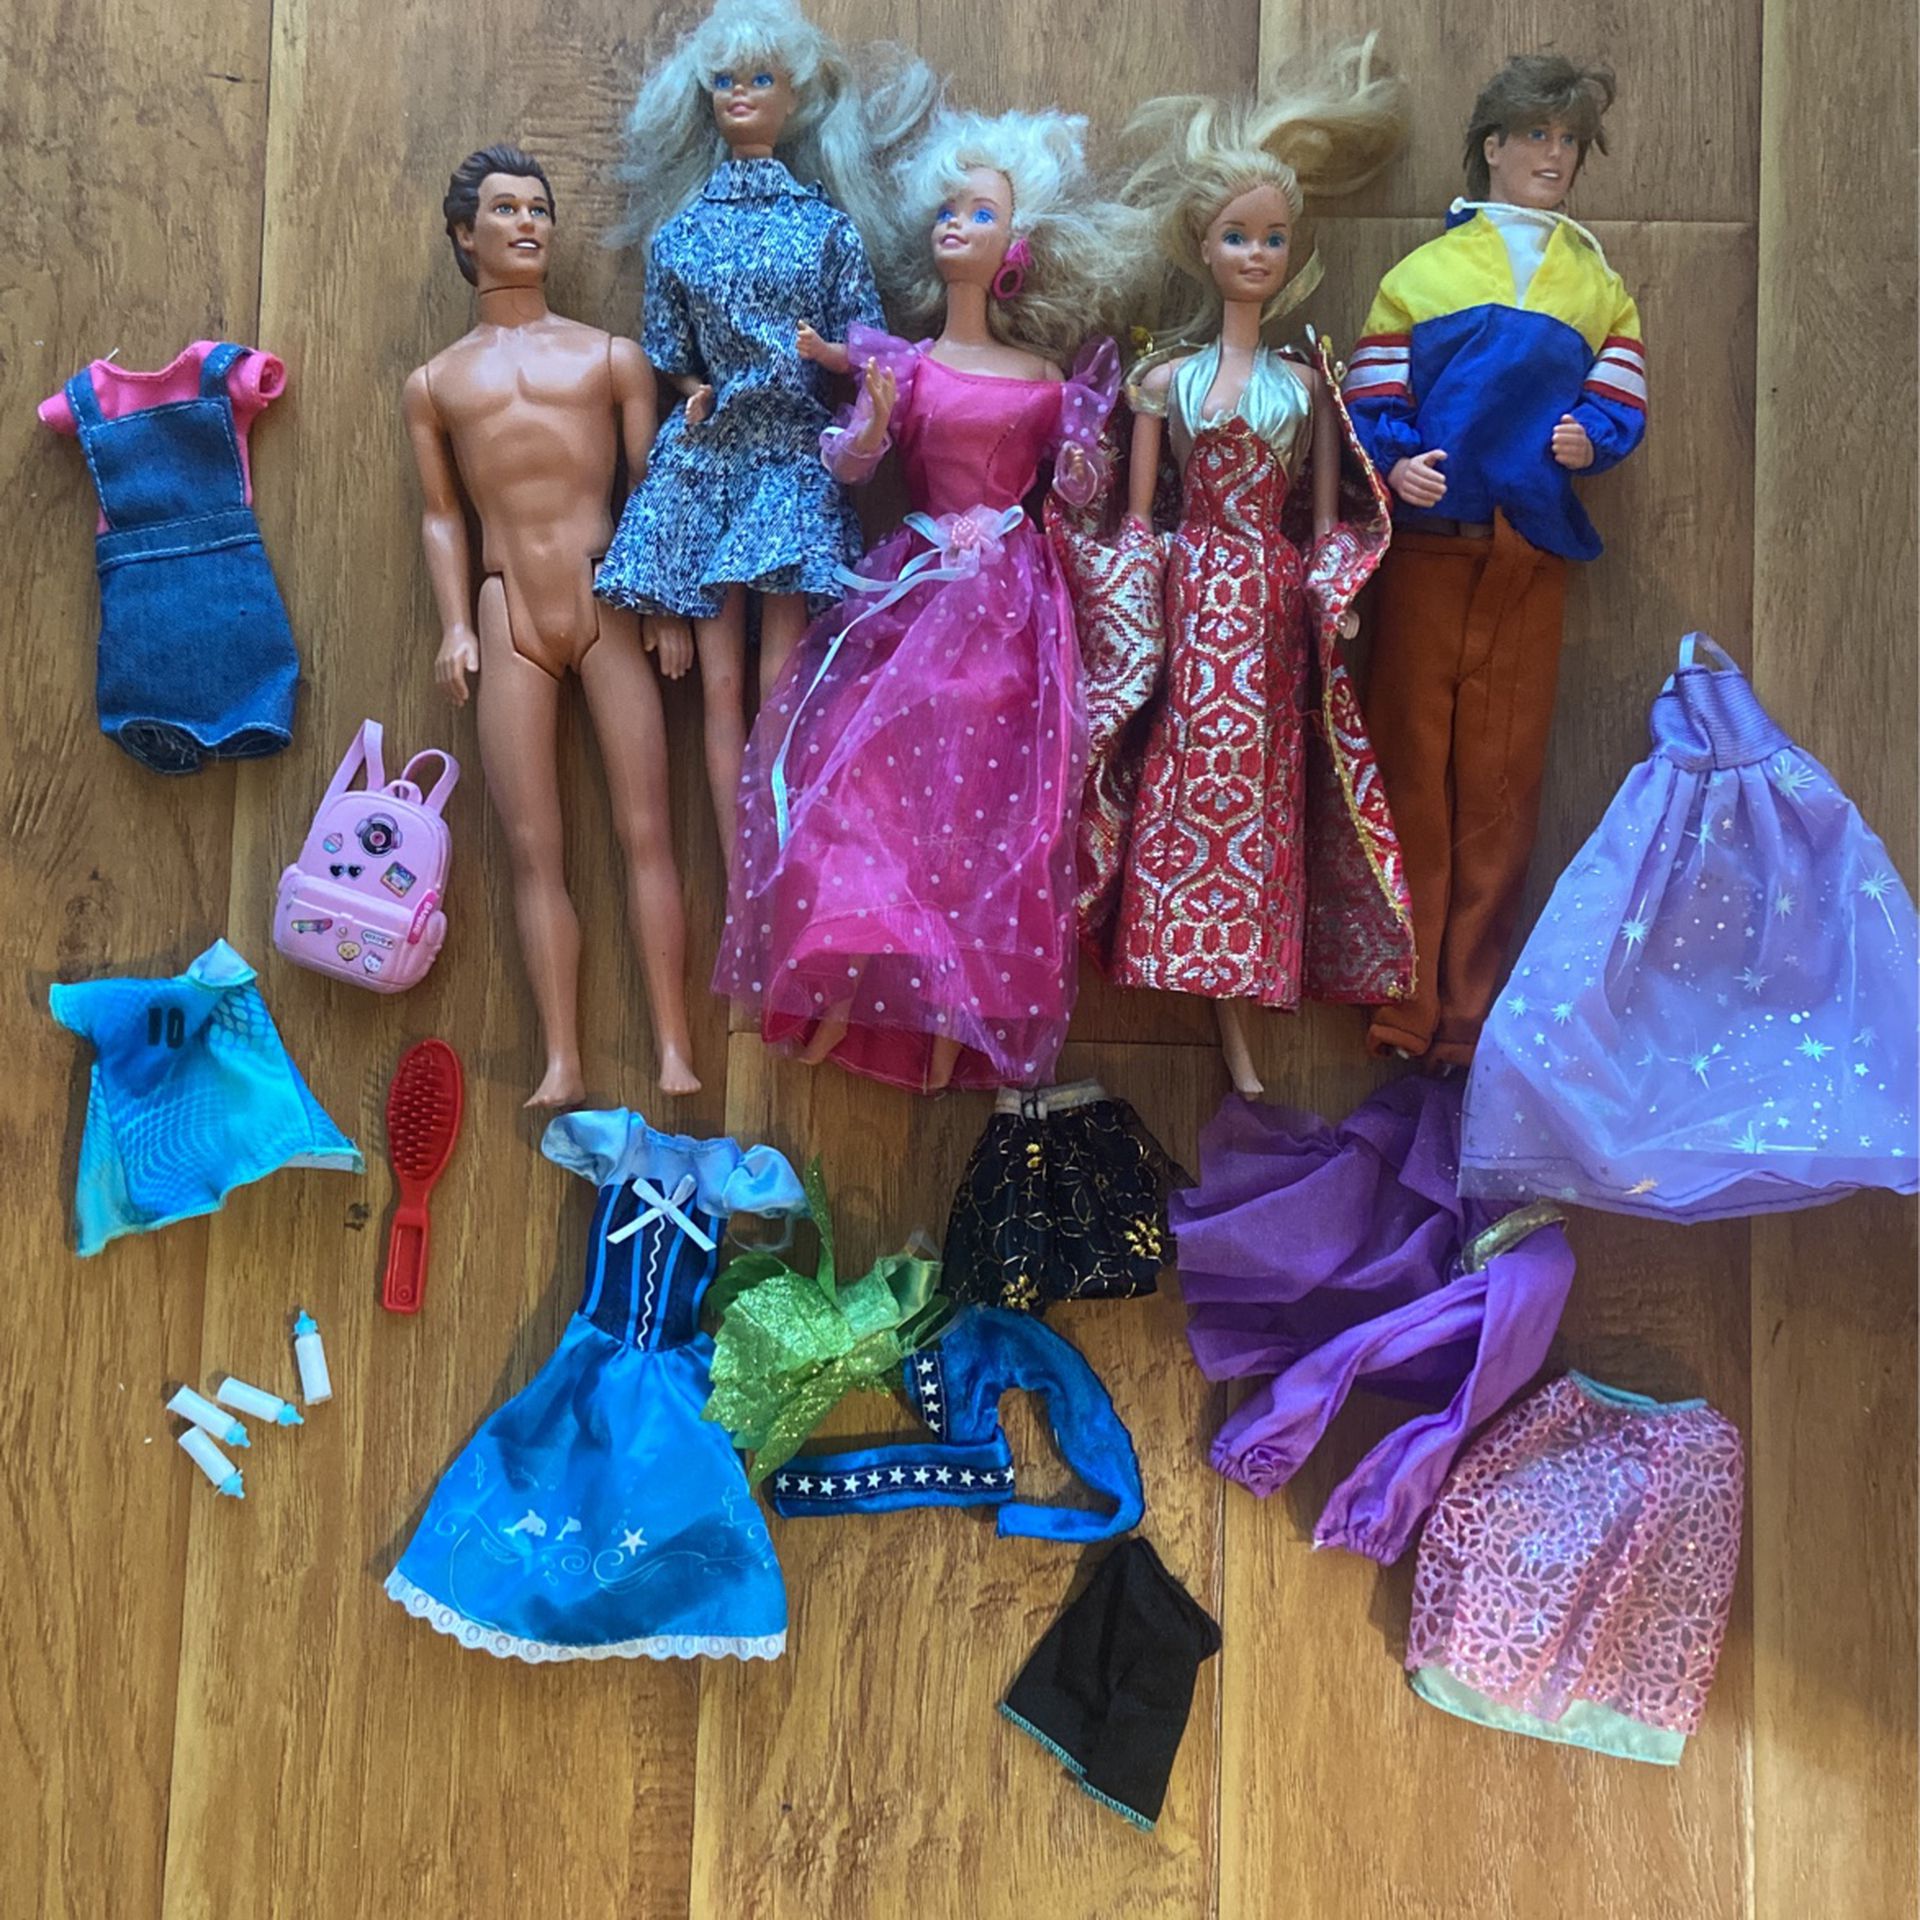 barbie dolls and two ken and clothes